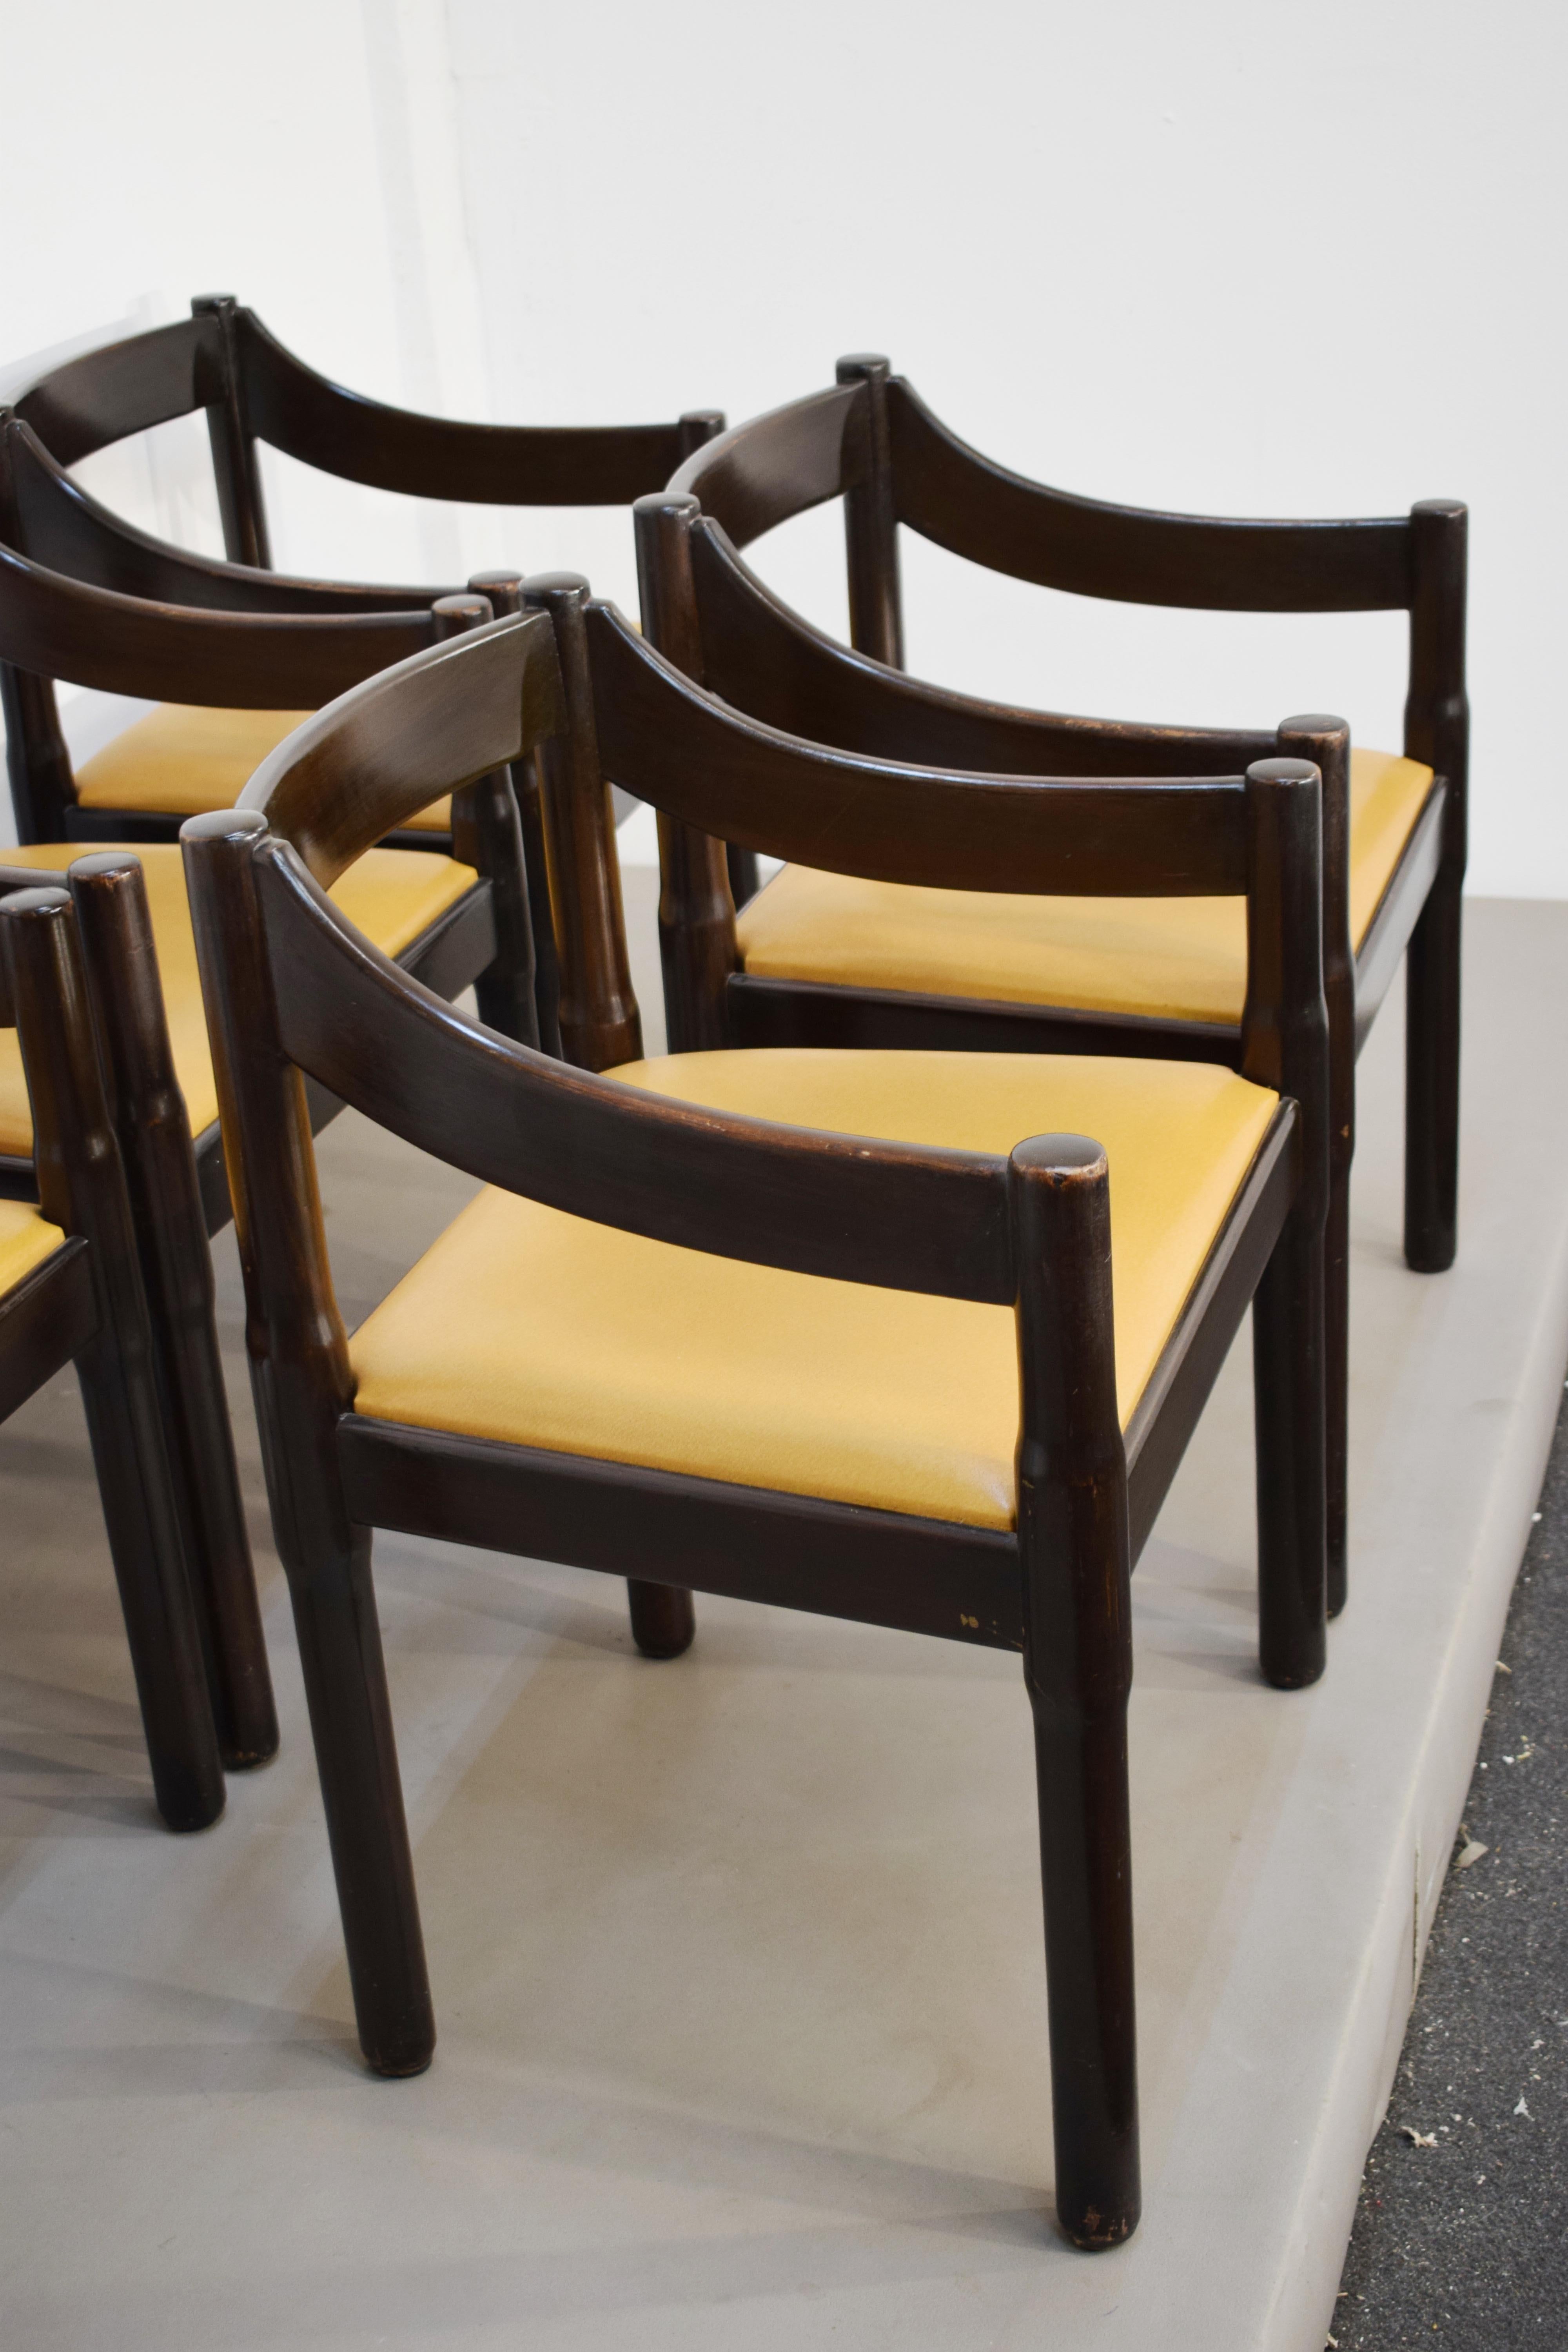 Set of 5 Carimate chairs by Vico Magistretti, Italy, 1960s
Dimensions: H= 74 cm; W= 59 cm; D= 47 cm; H seat.= 44 cm.